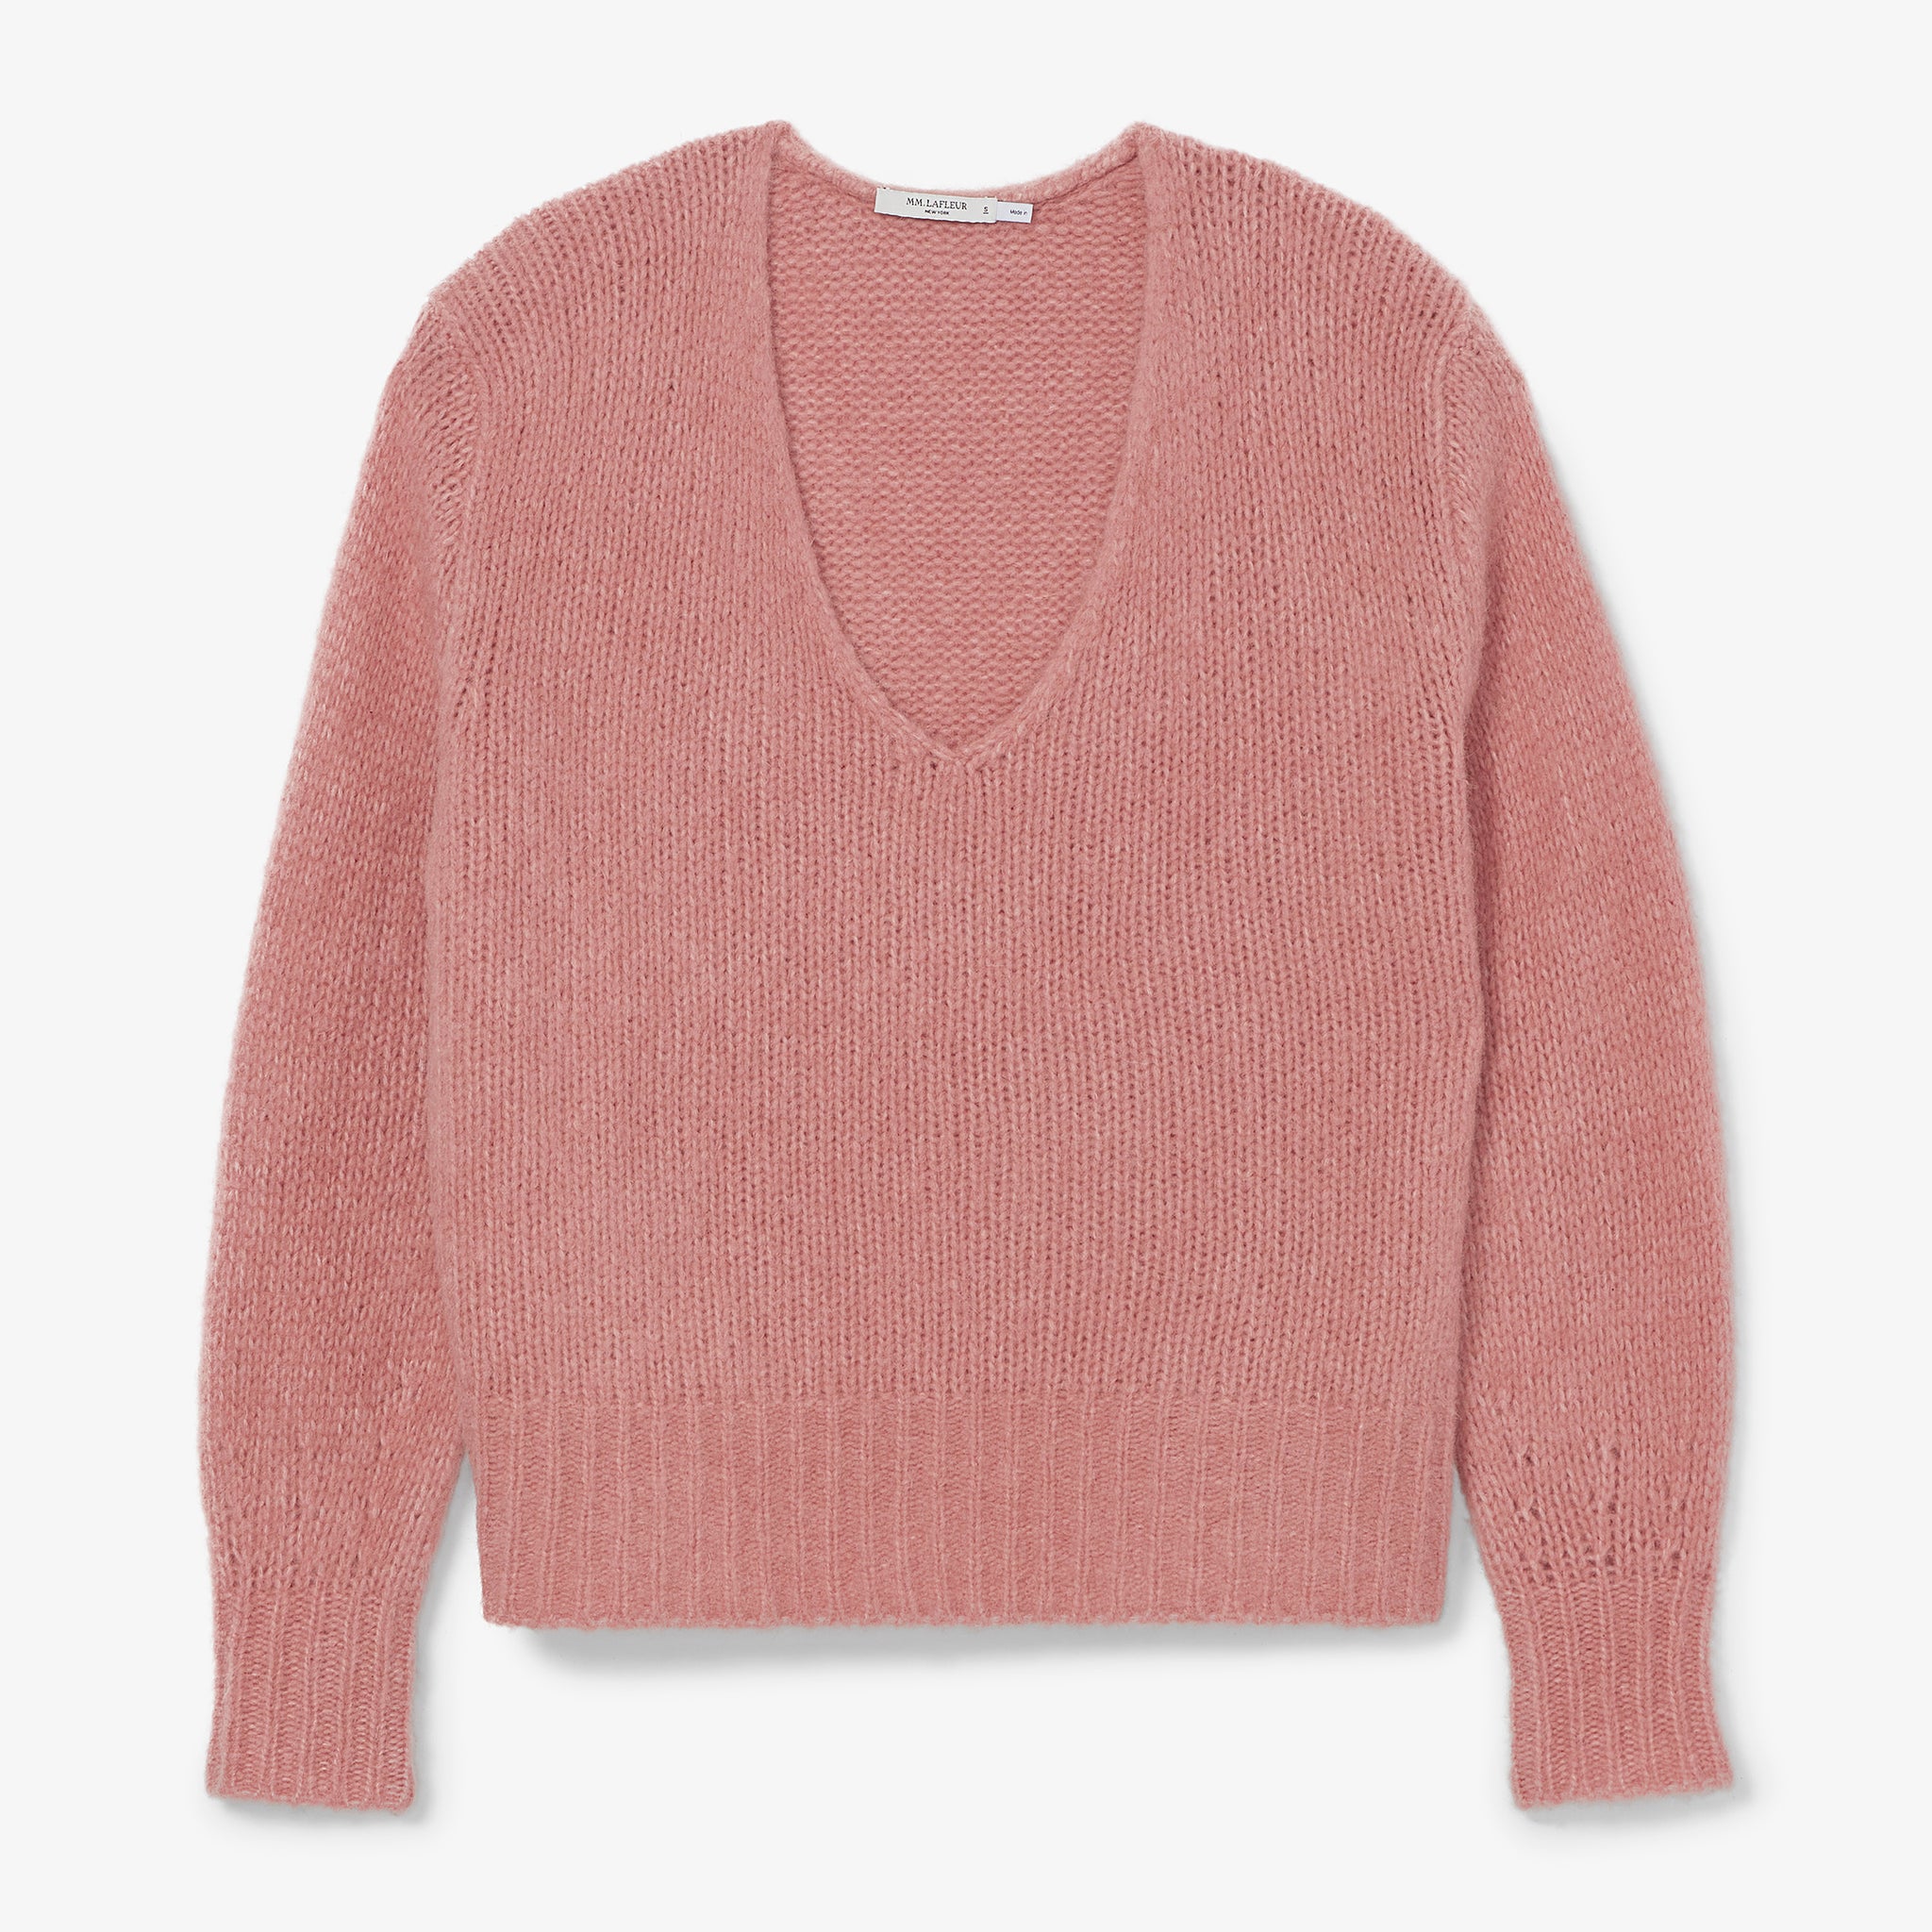 Packshot image of the cathy sweater in himilayan salt